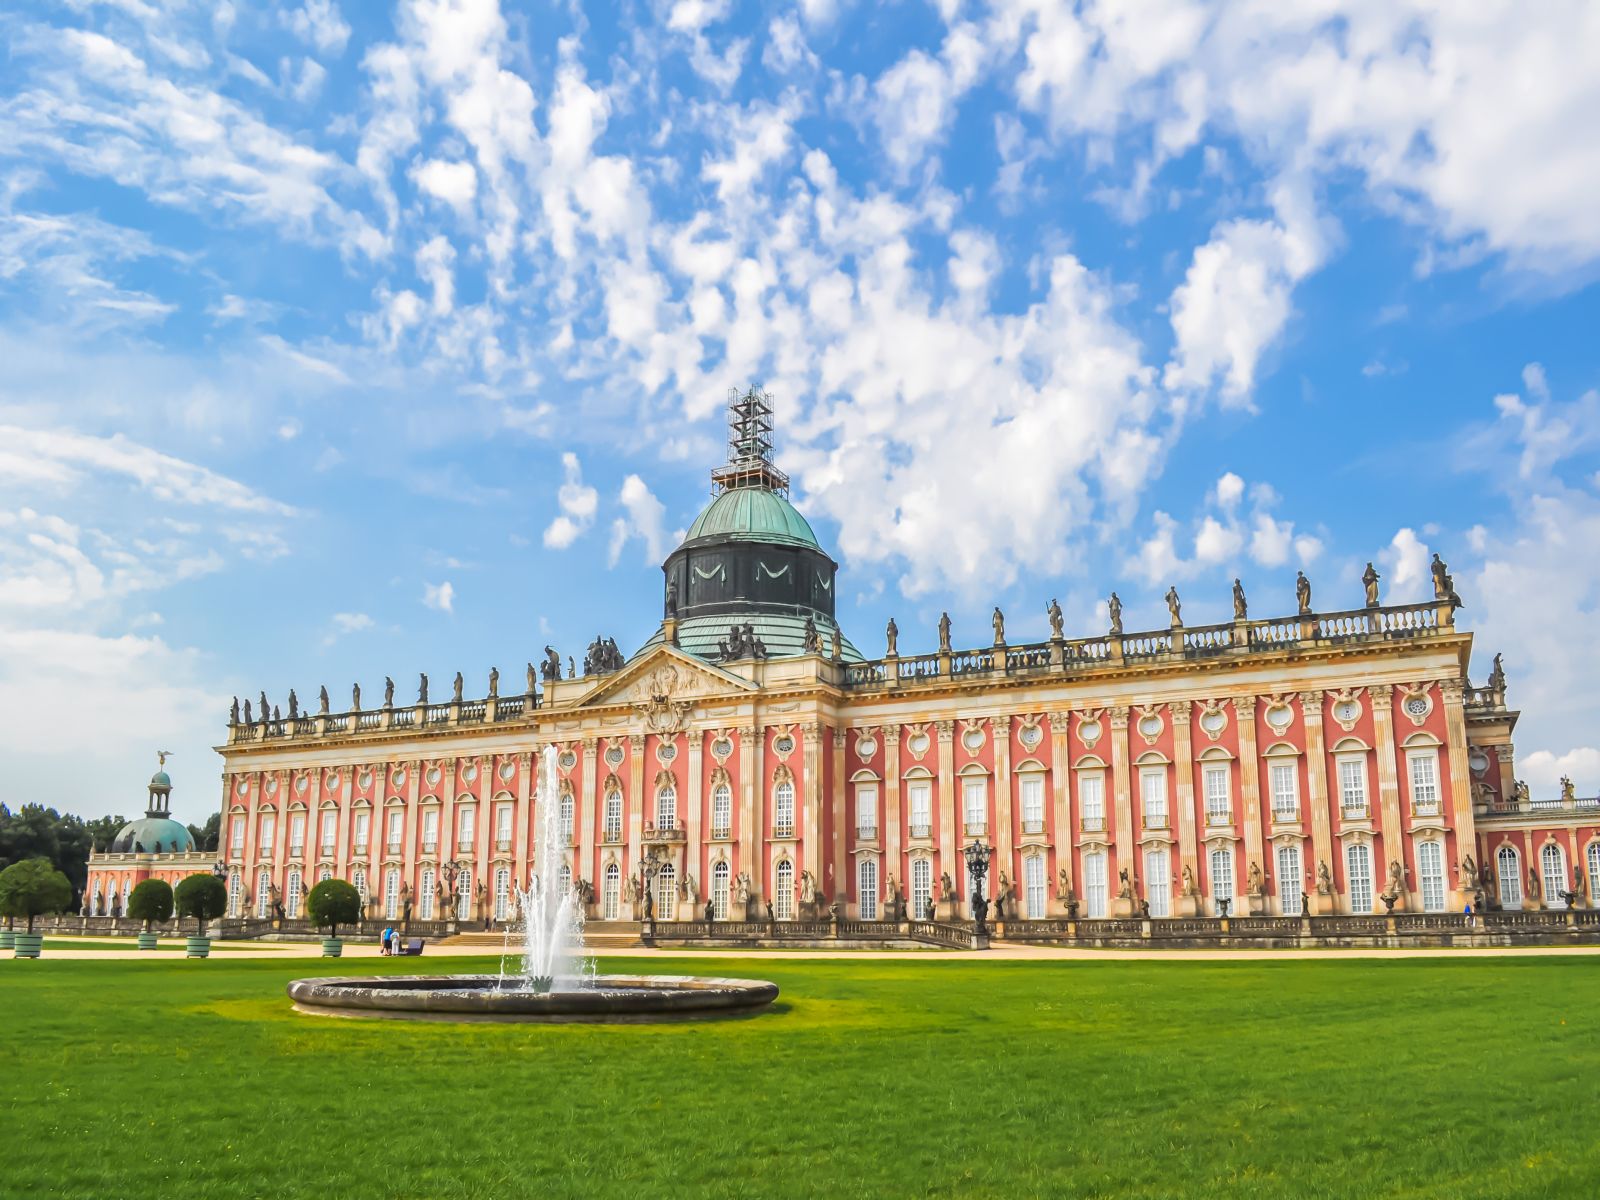 New Palace in Potsdam